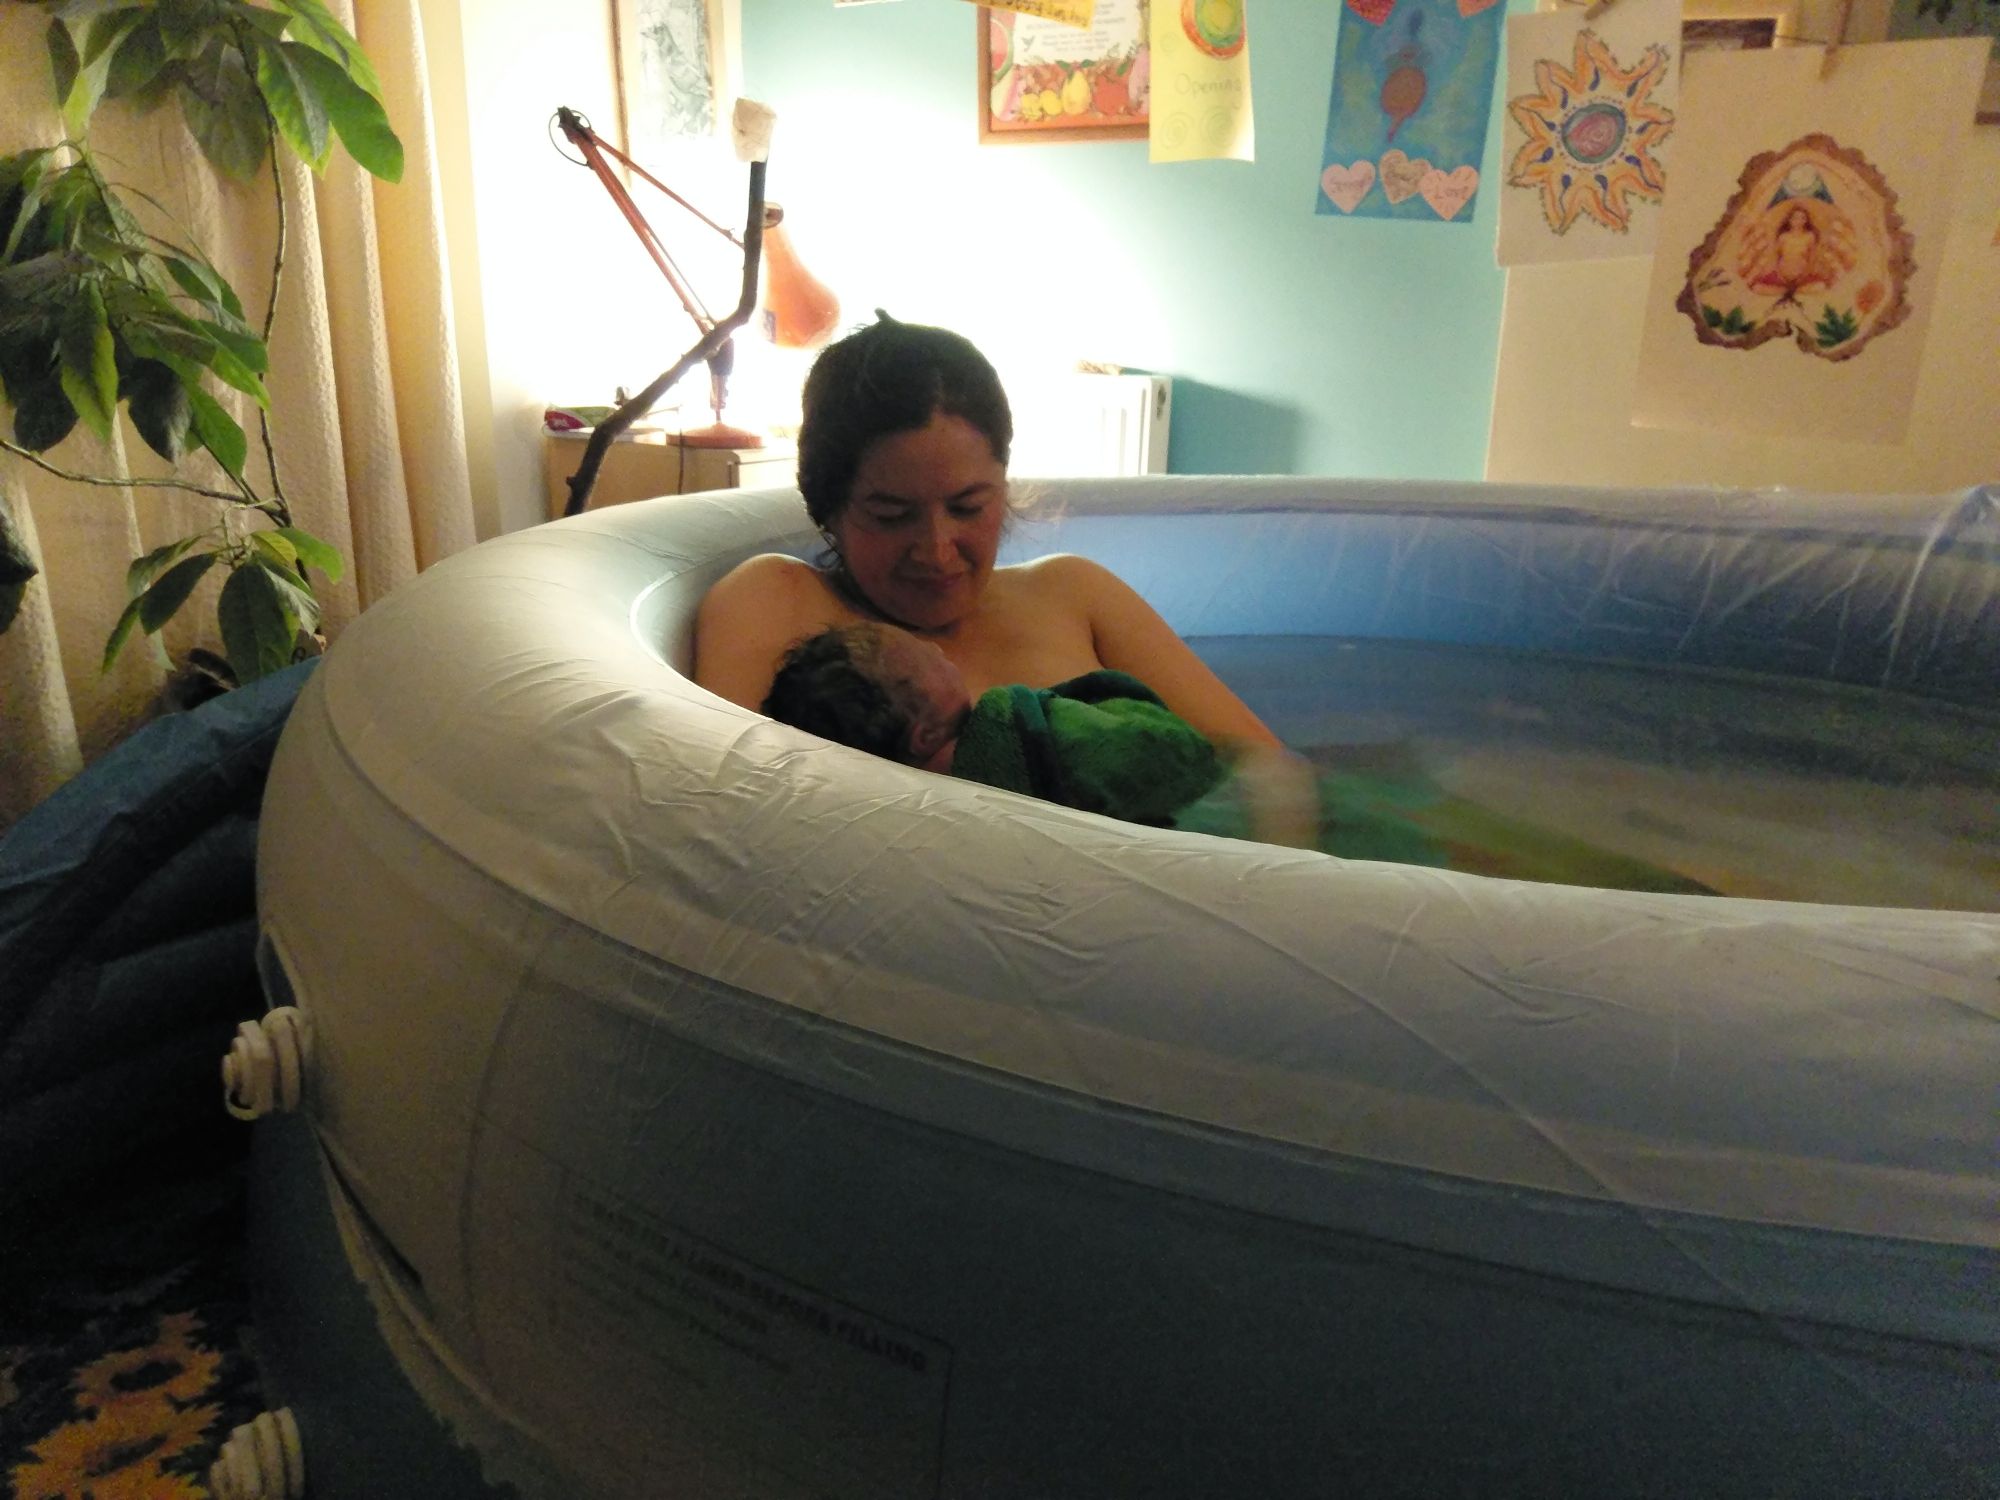 Image of a woman holding a new baby in a birth pool